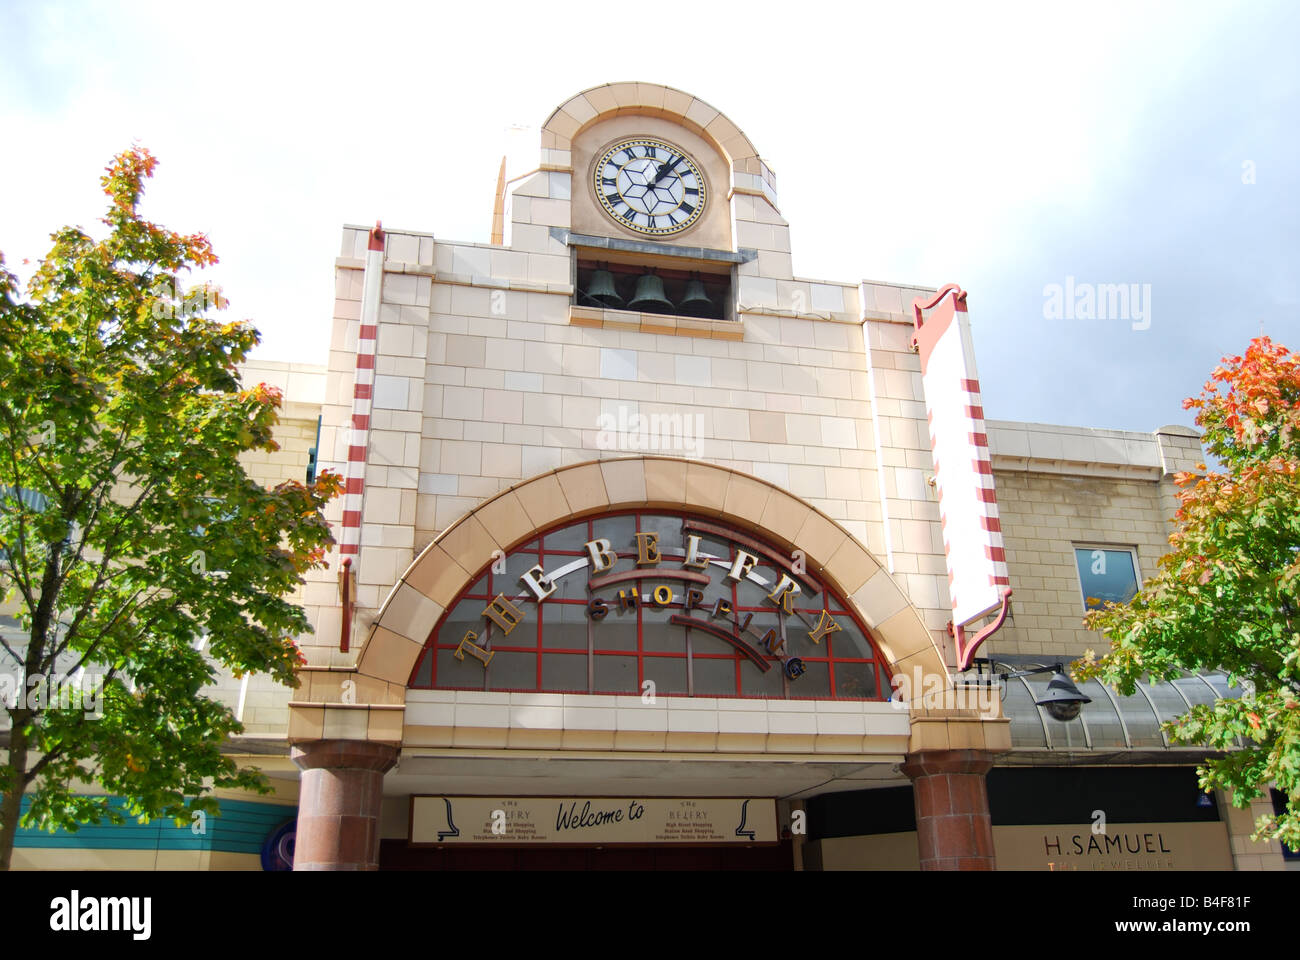 The Belfry Shopping Centre entrance, High Street, Redhill, Surrey, England, United Kingdom Stock Photo